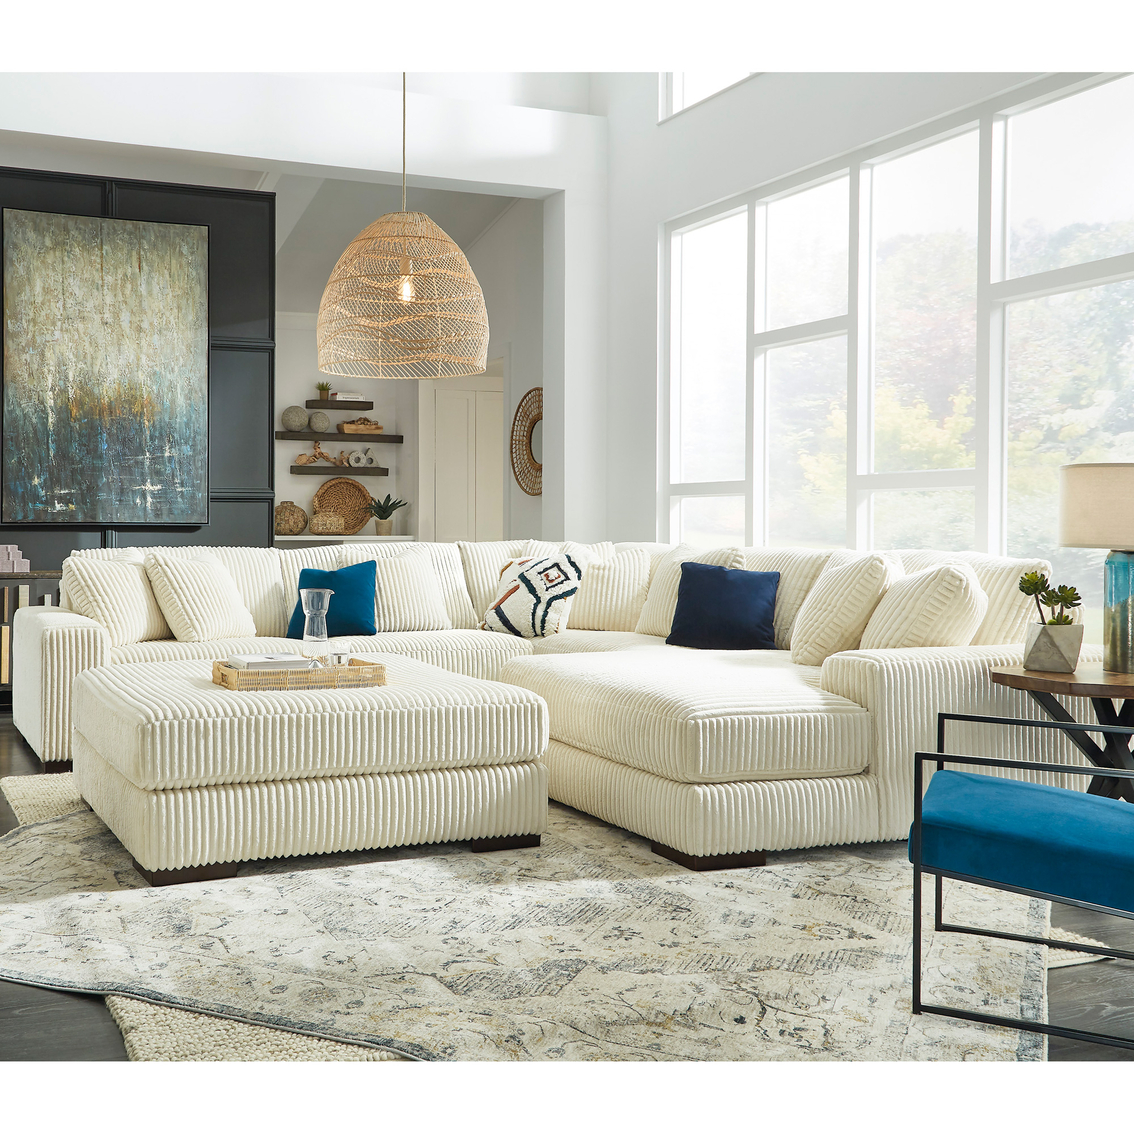 Millennium by Ashley Lindyn 5 pc. Sectional with Chaise - Image 2 of 2